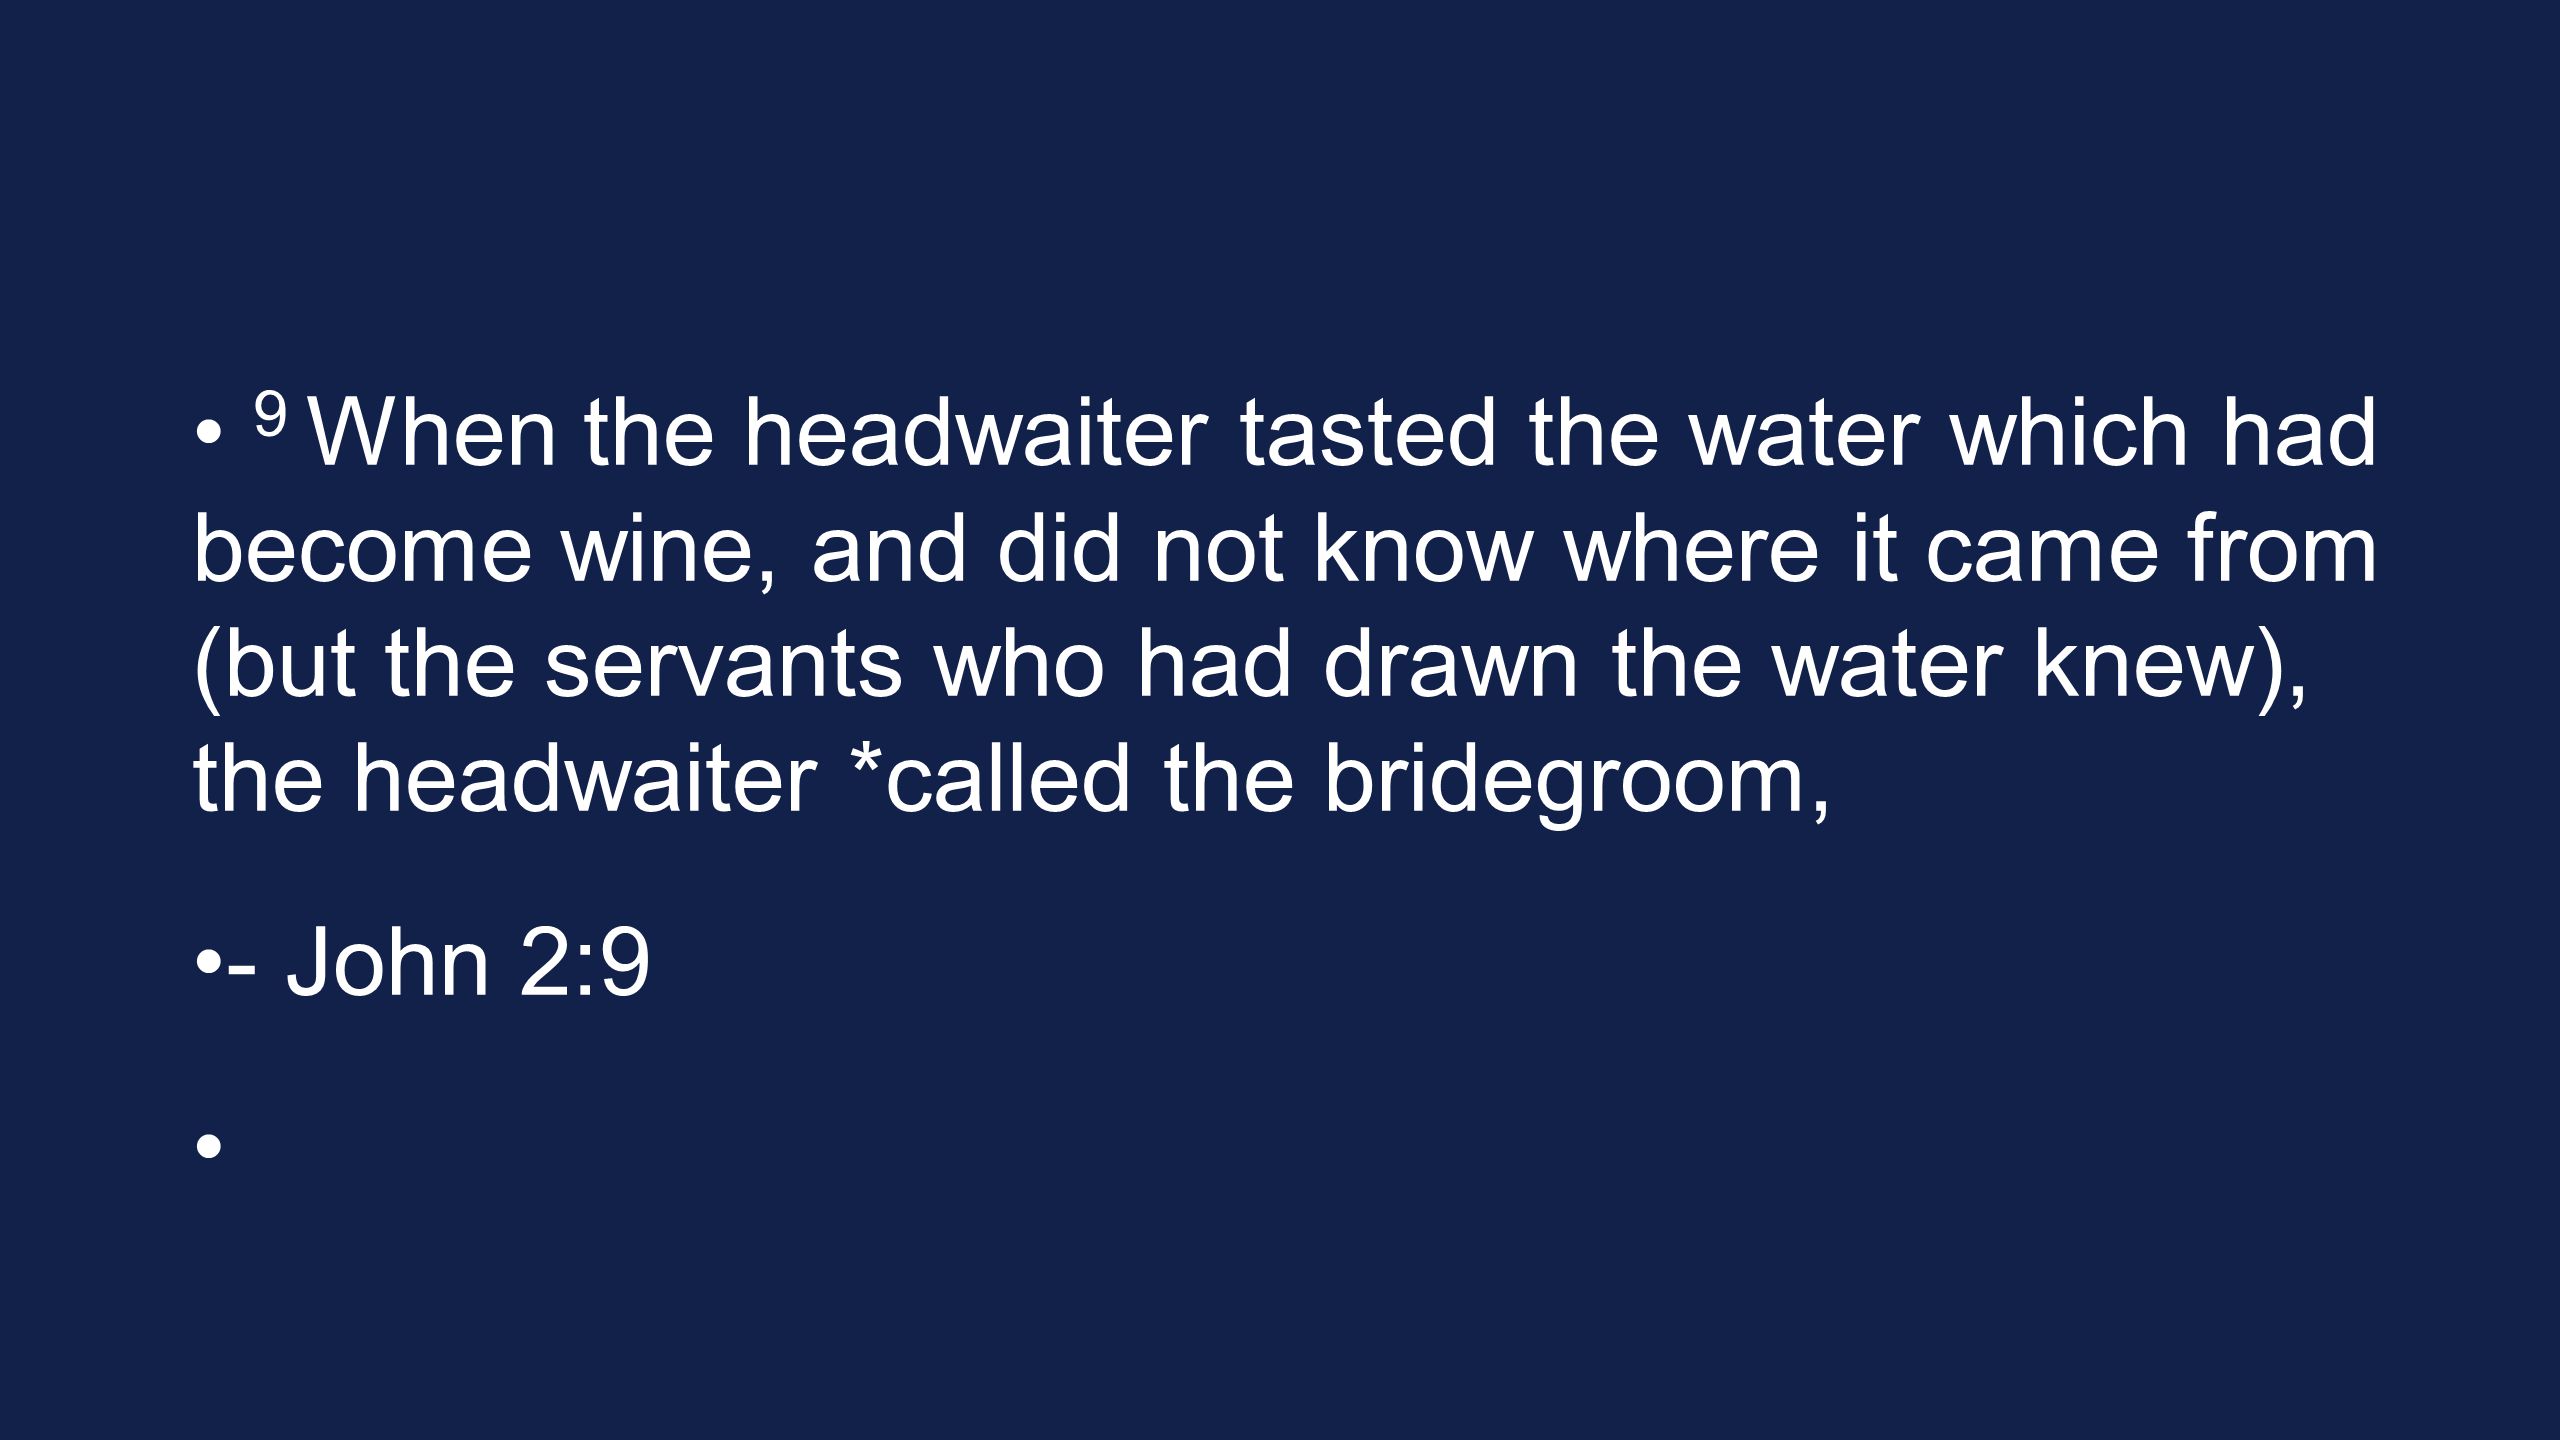 9 When the headwaiter tasted the water which had become wine, and did not know where it came from (but the servants who had drawn the water knew), the headwaiter *called the bridegroom, - John 2:9